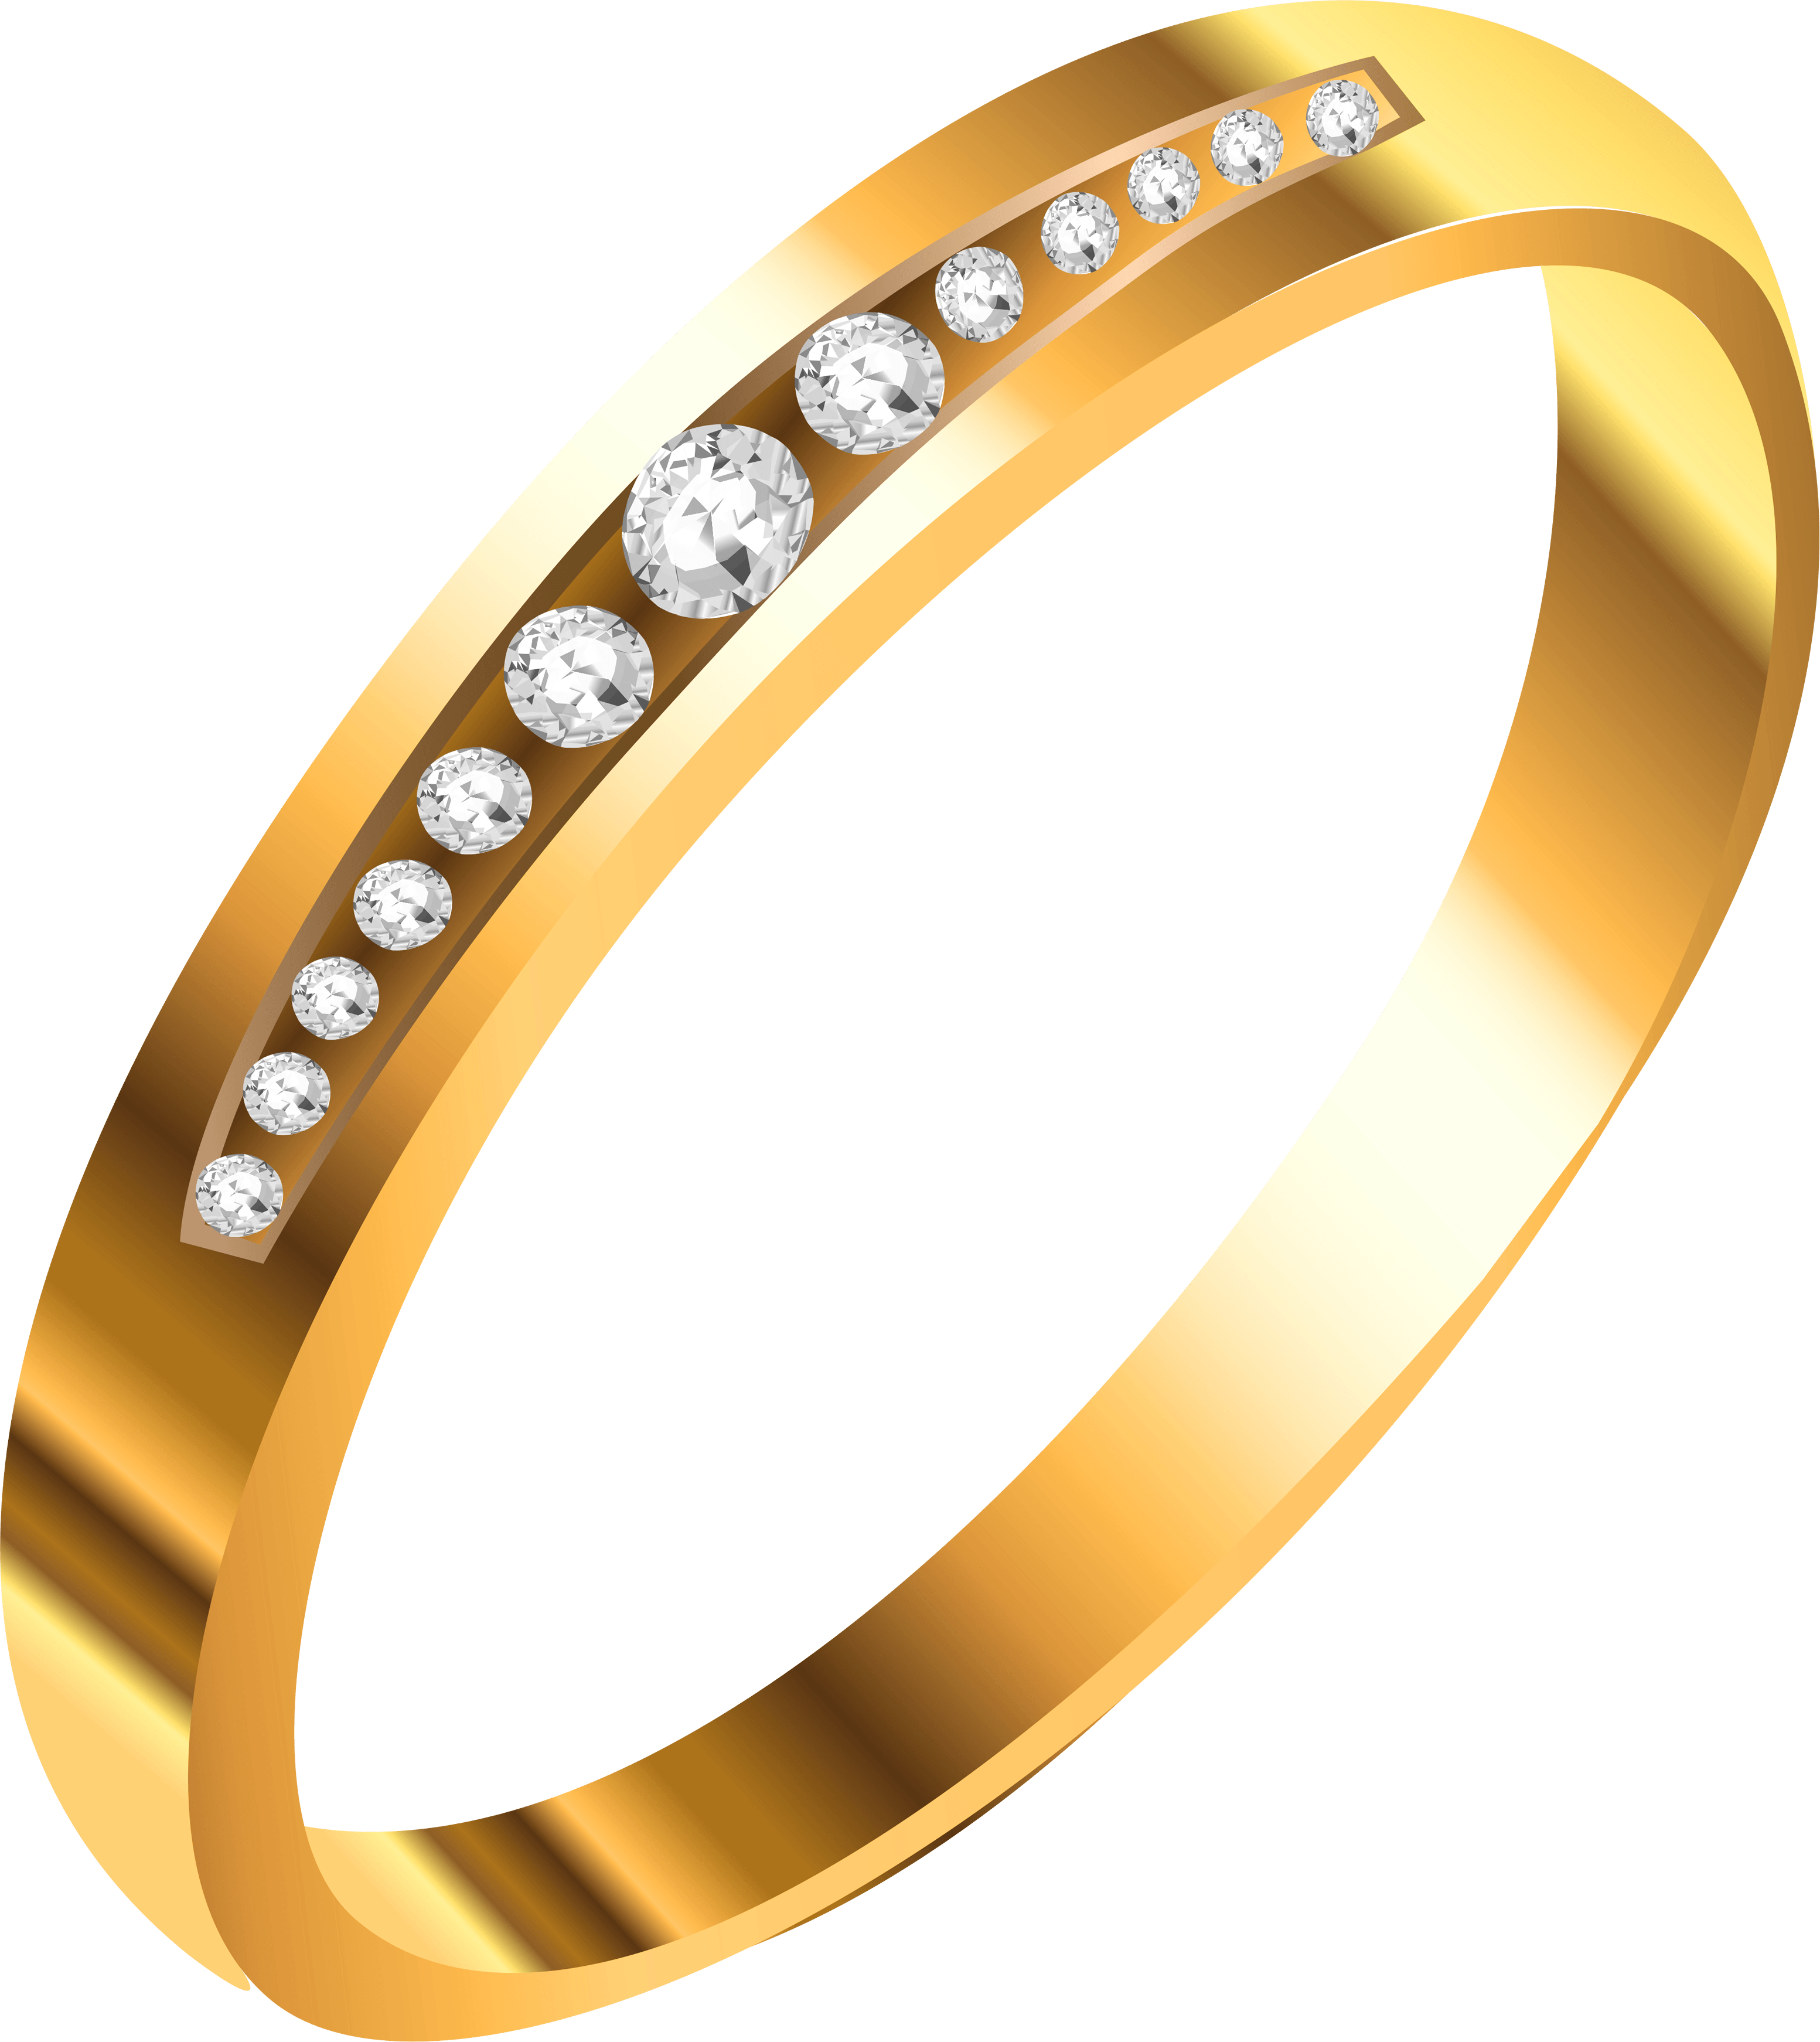 Download Jewelry Png Image HQ PNG Image FreePNGImg